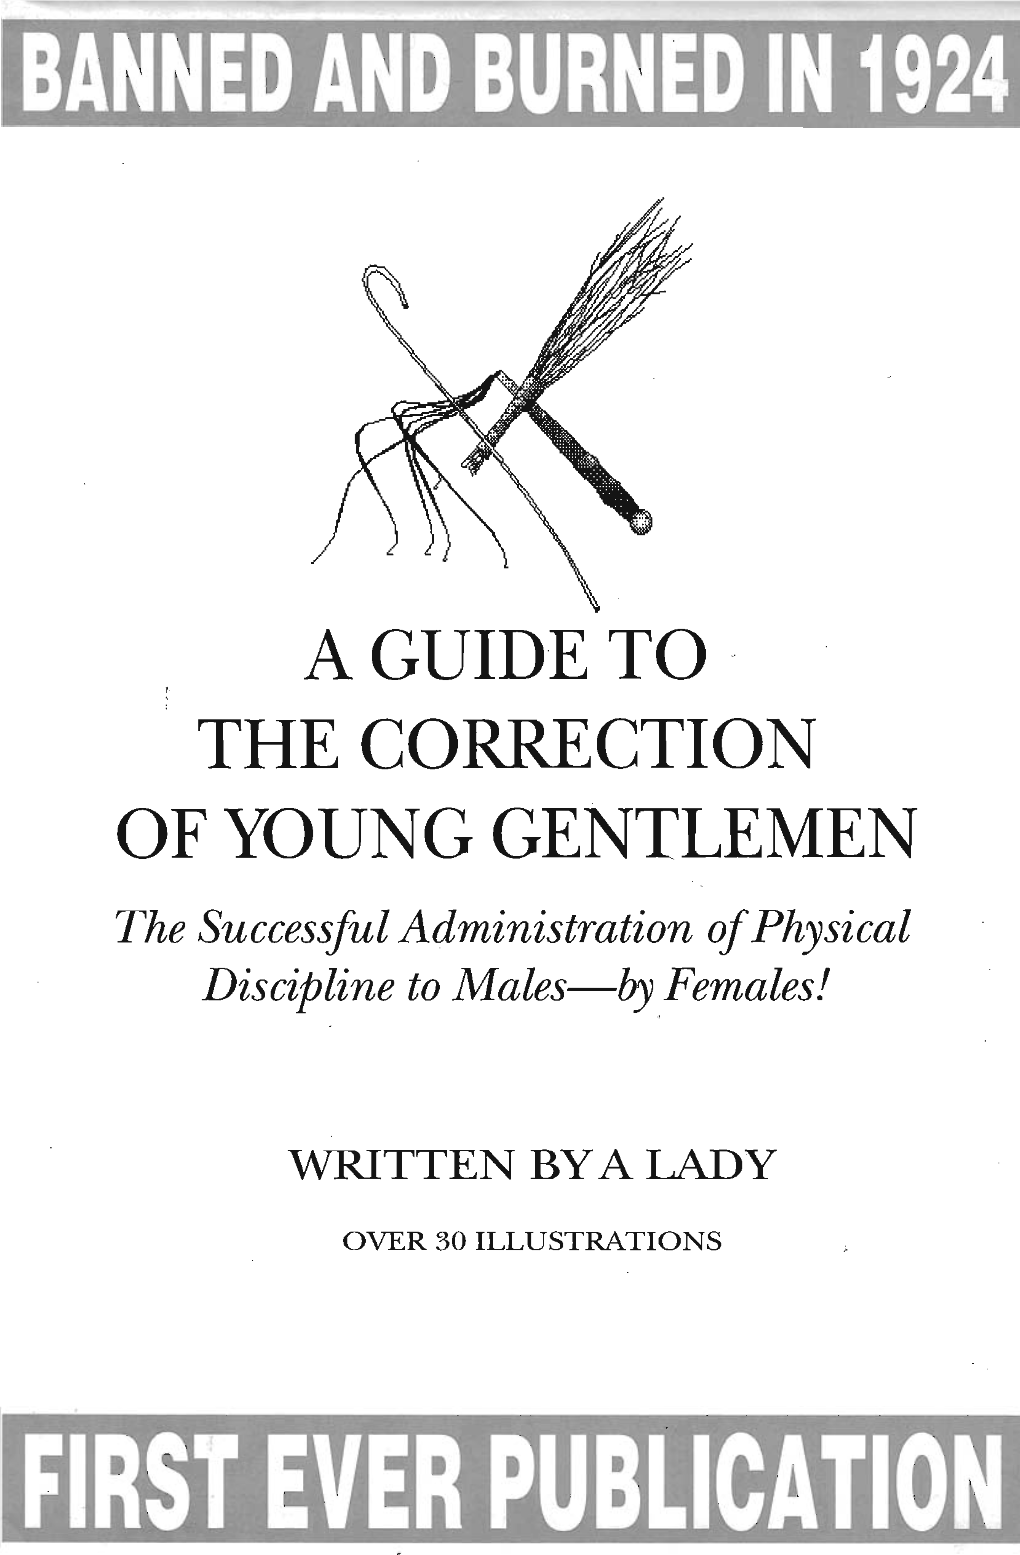 A GUIDE to the CORRECTION of YOUNG GENTLEMEN Or, the Successful Administration of Physical Discipline to Males, by Females